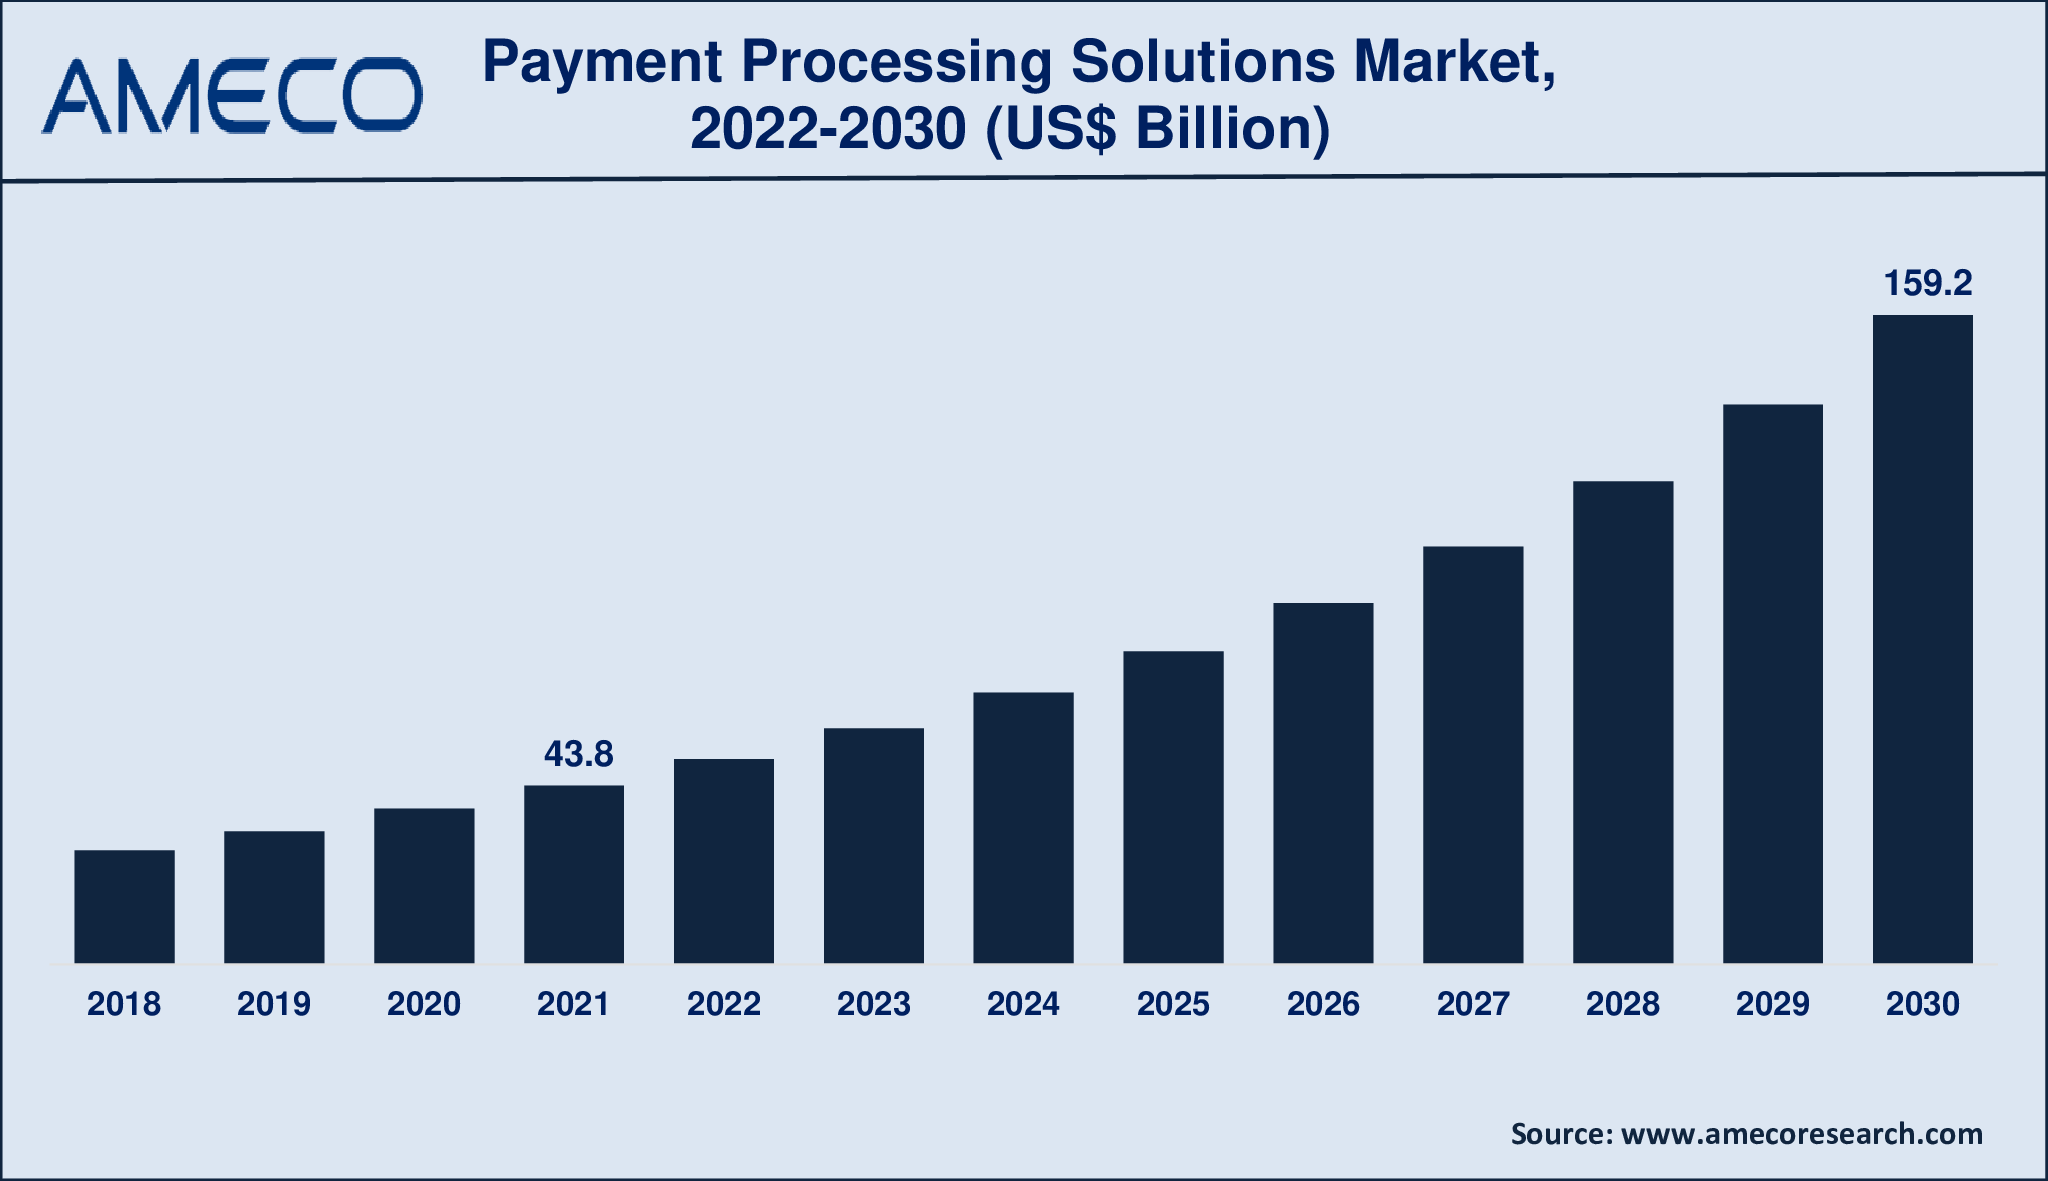 Payment Processing Solutions Market Size, Share, Growth, Trends, and Forecast 2022-2030